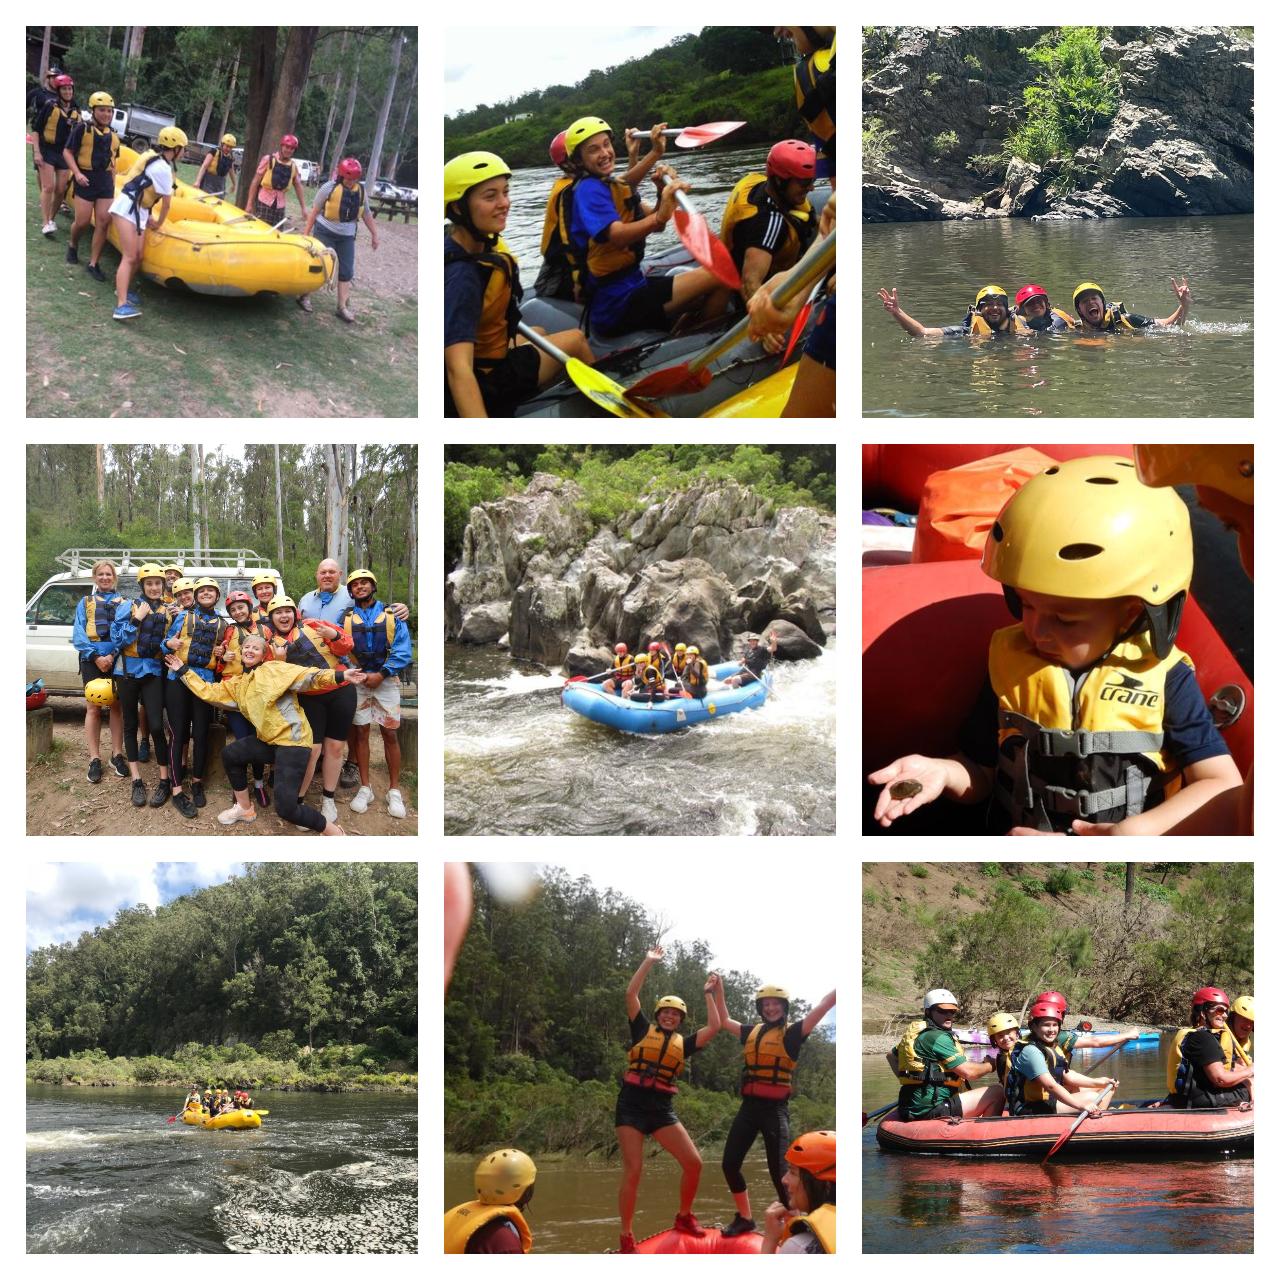 Family-friendly Whitewater Rafting - HALF DAY - Includes Snacks/Drinks